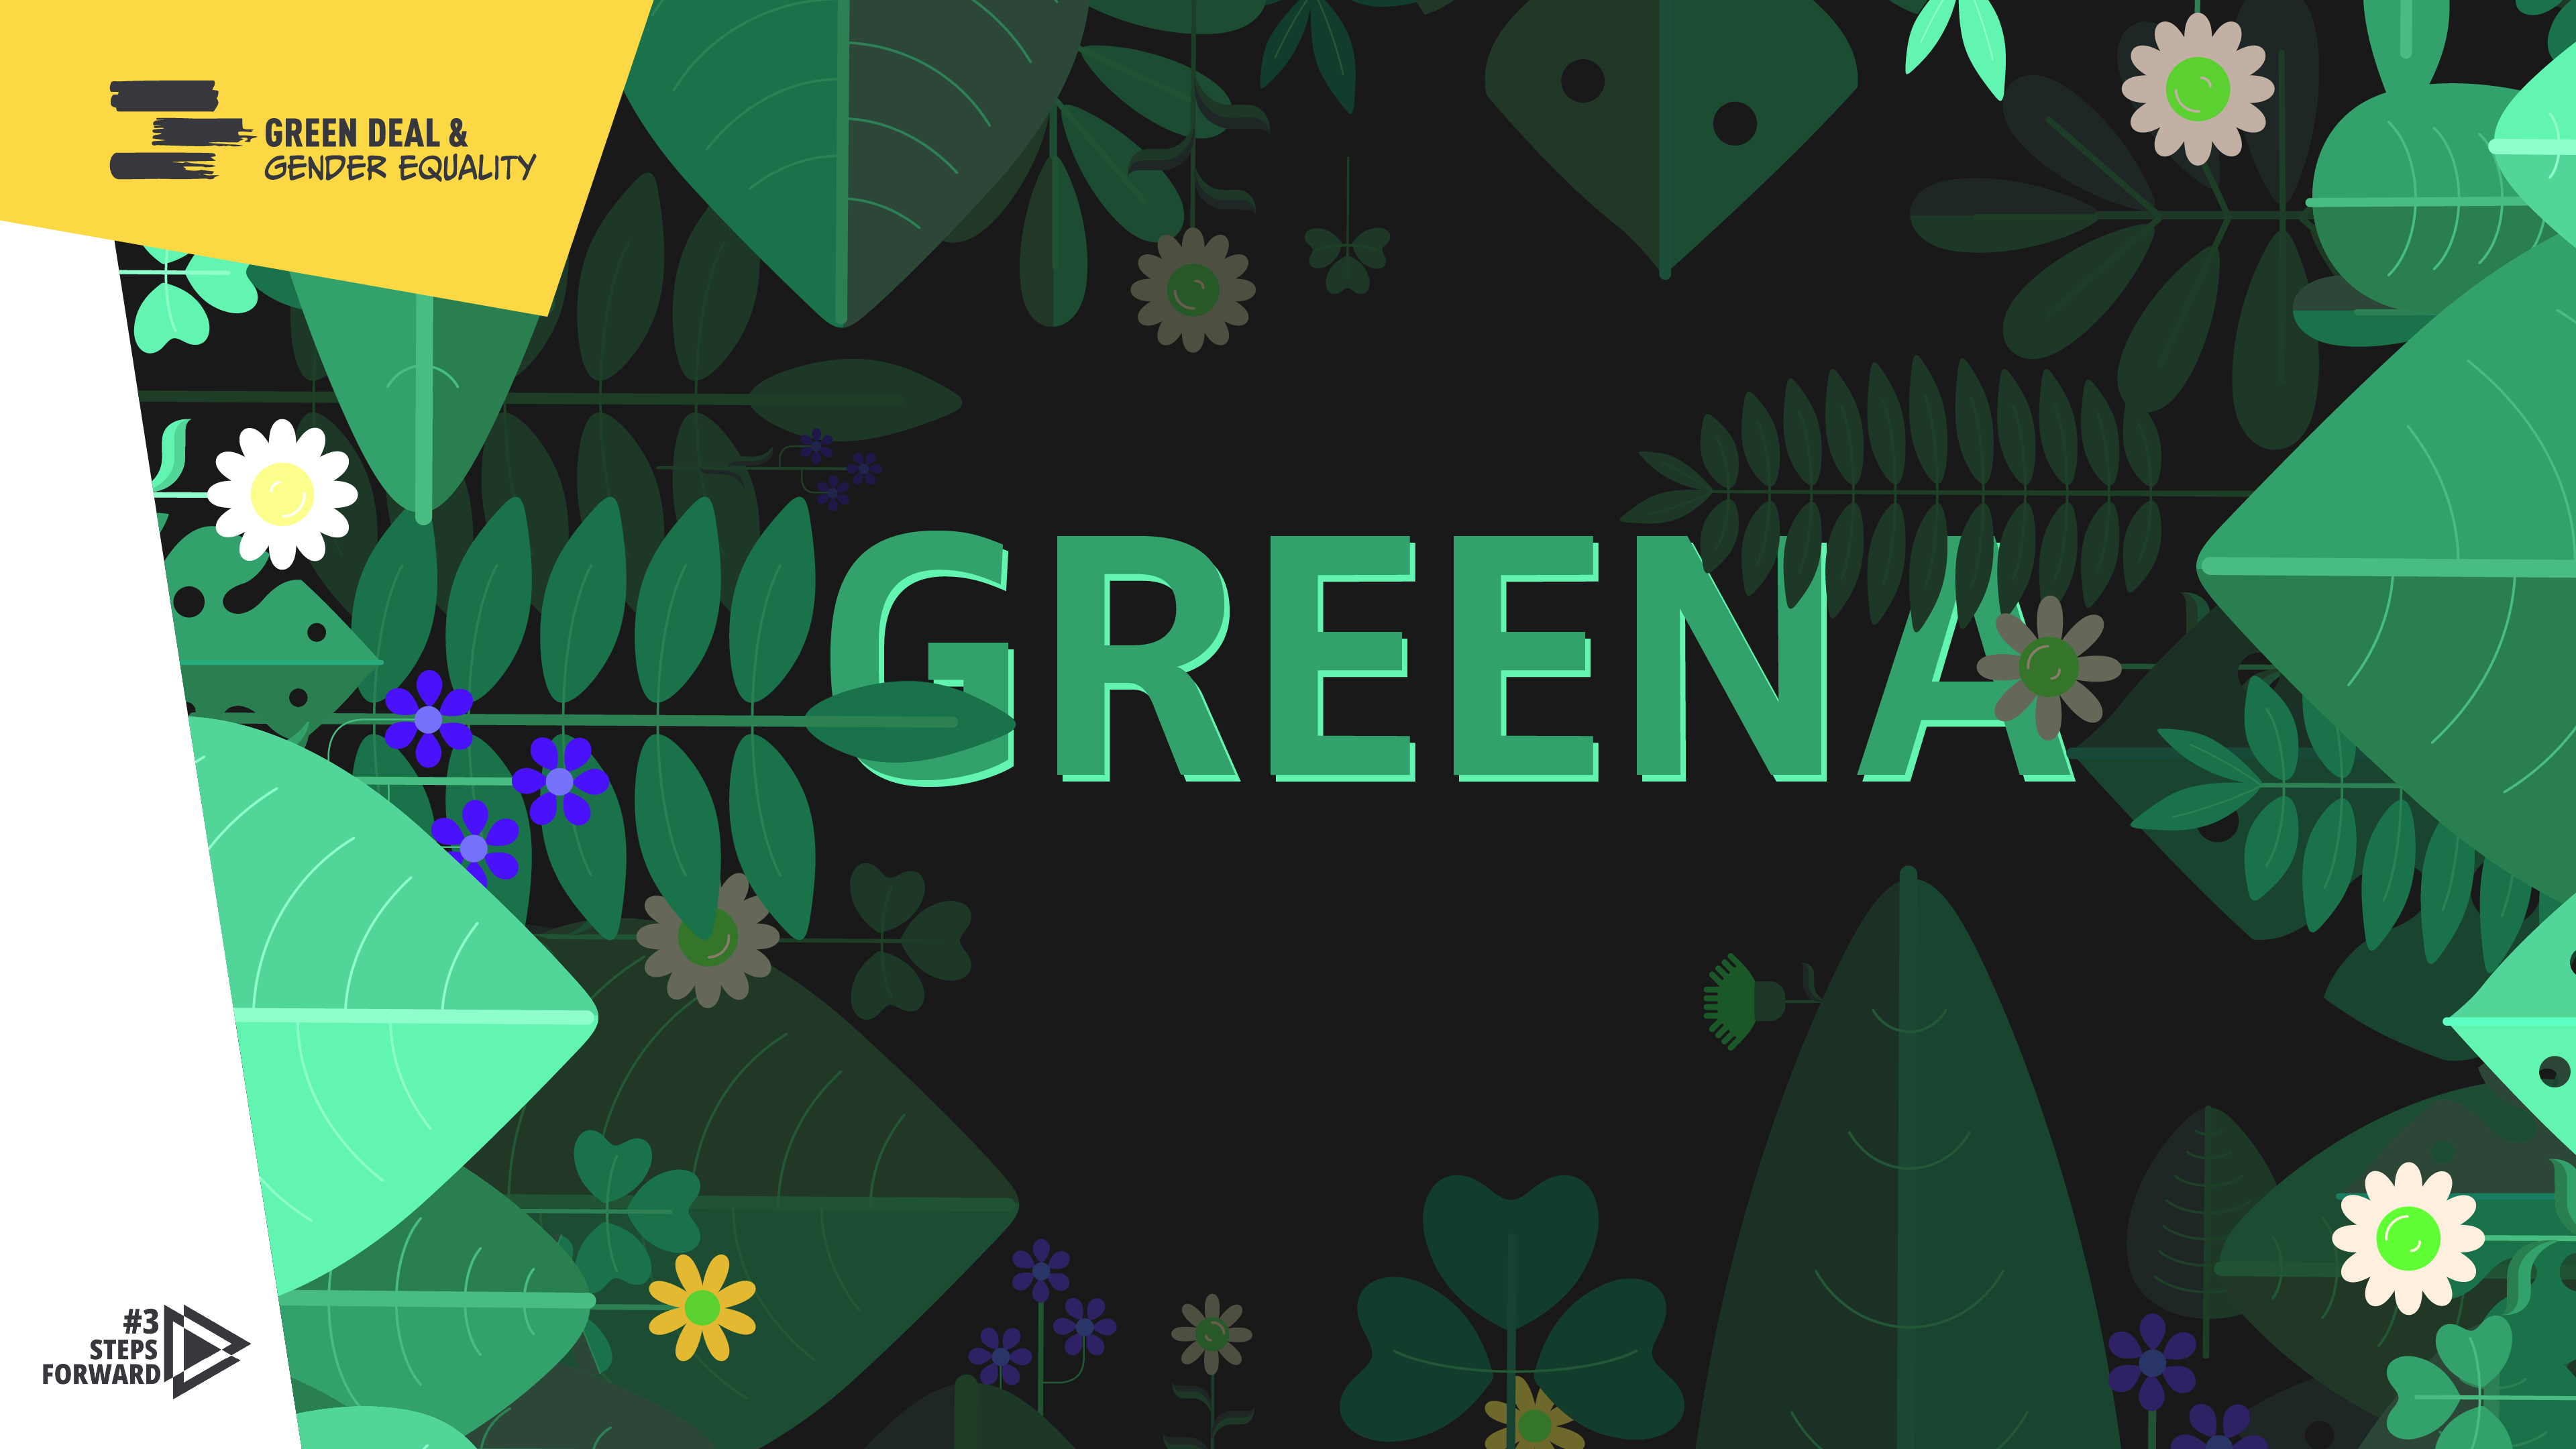 "GREENA" written amongst flowers and leaves 